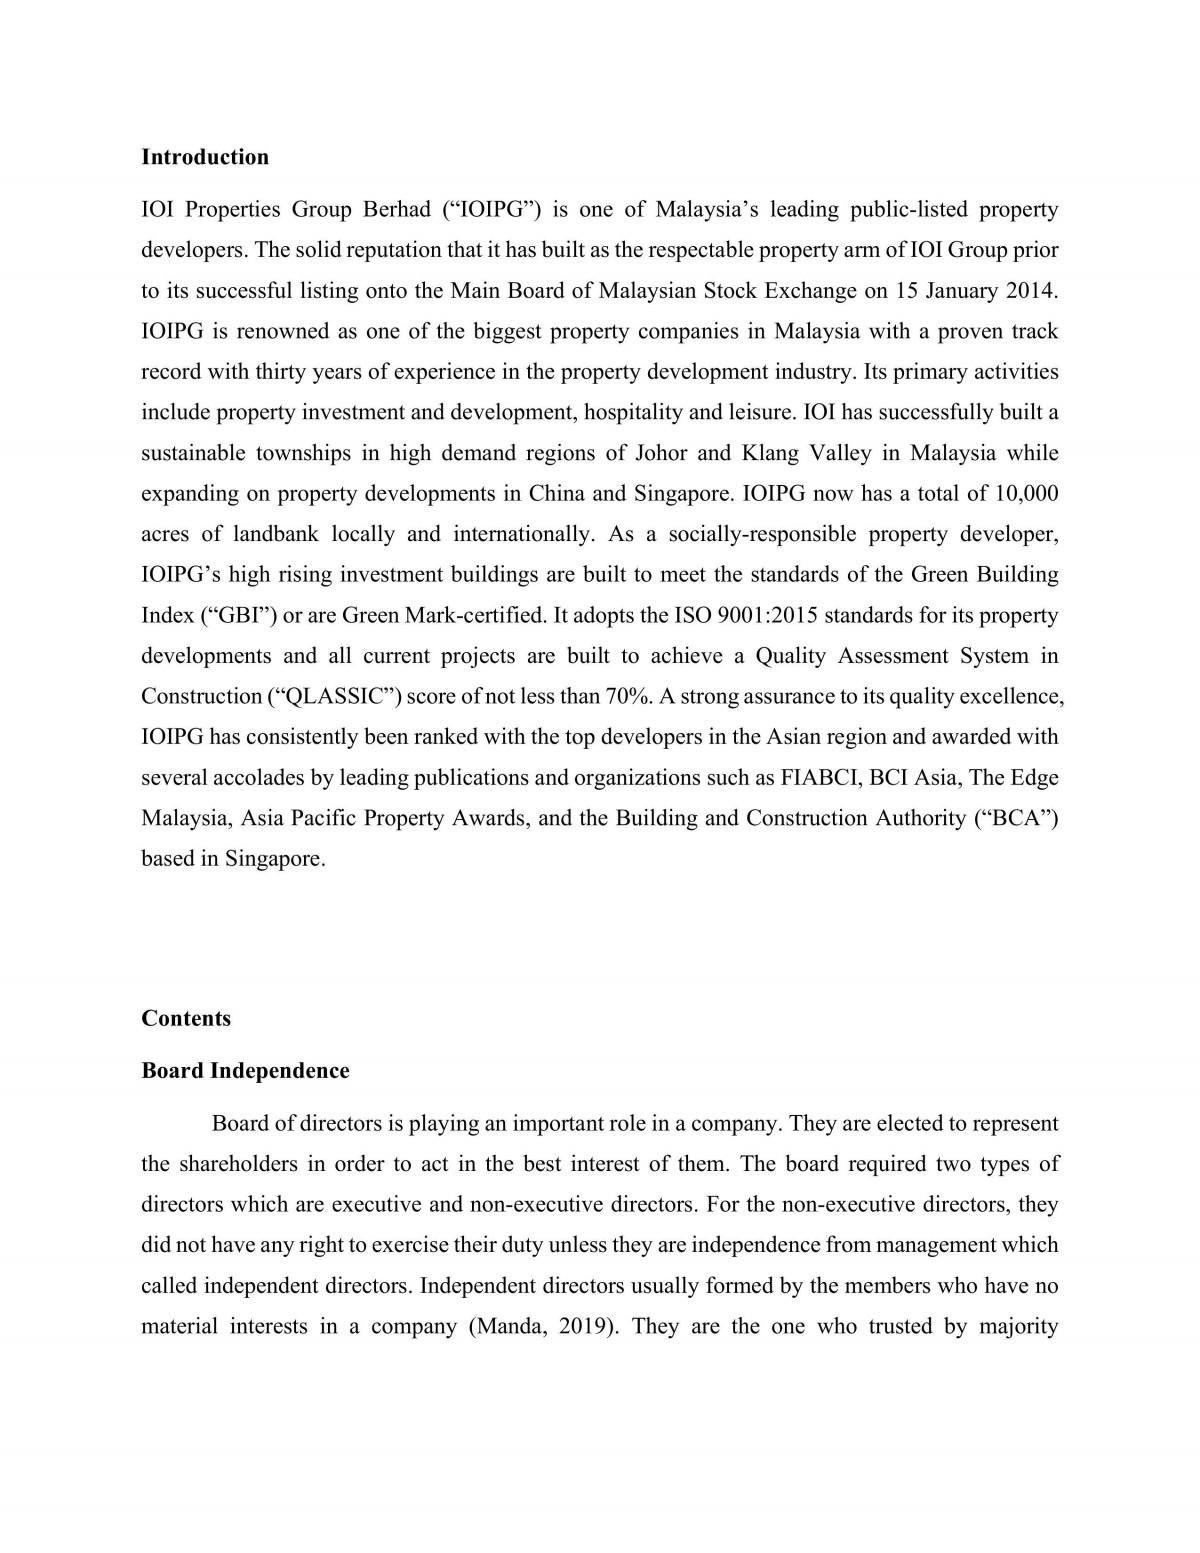 Corporate Ethics and Governance - Page 1